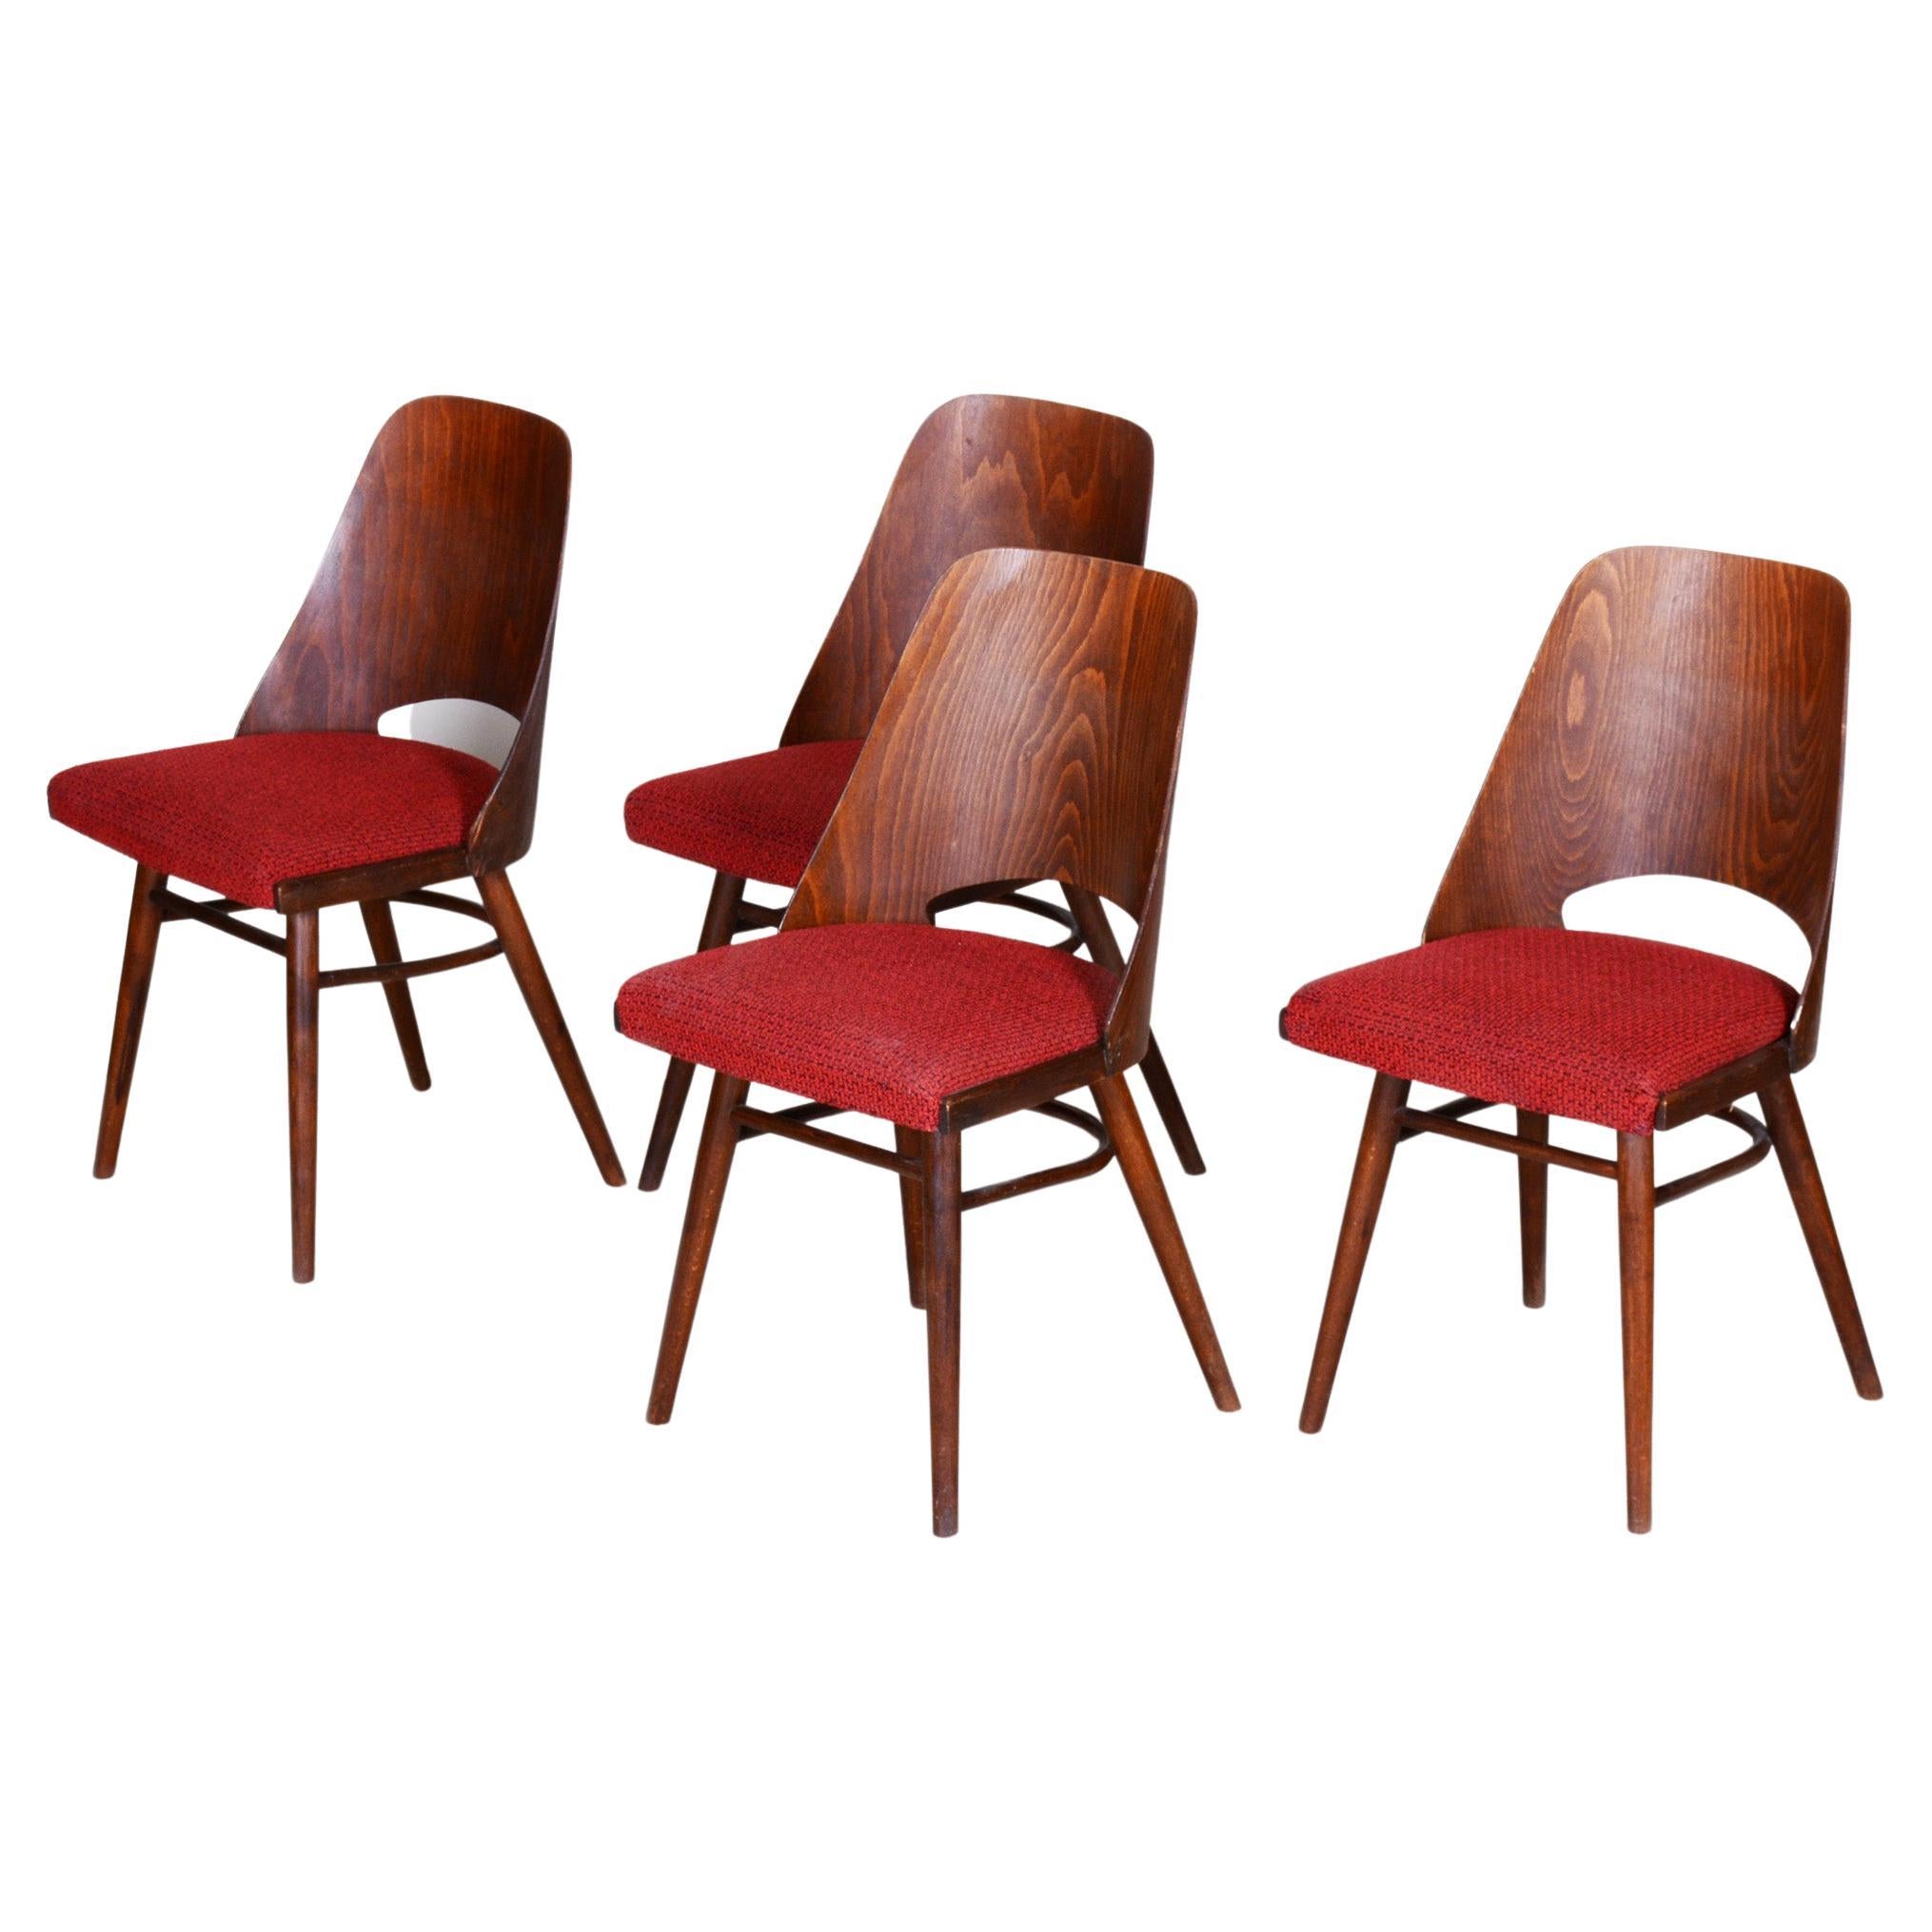 Well Preserved Czech Brown and Red Beech Chairs by Oswald Haerdtl, 4 Pcs, 1950s For Sale